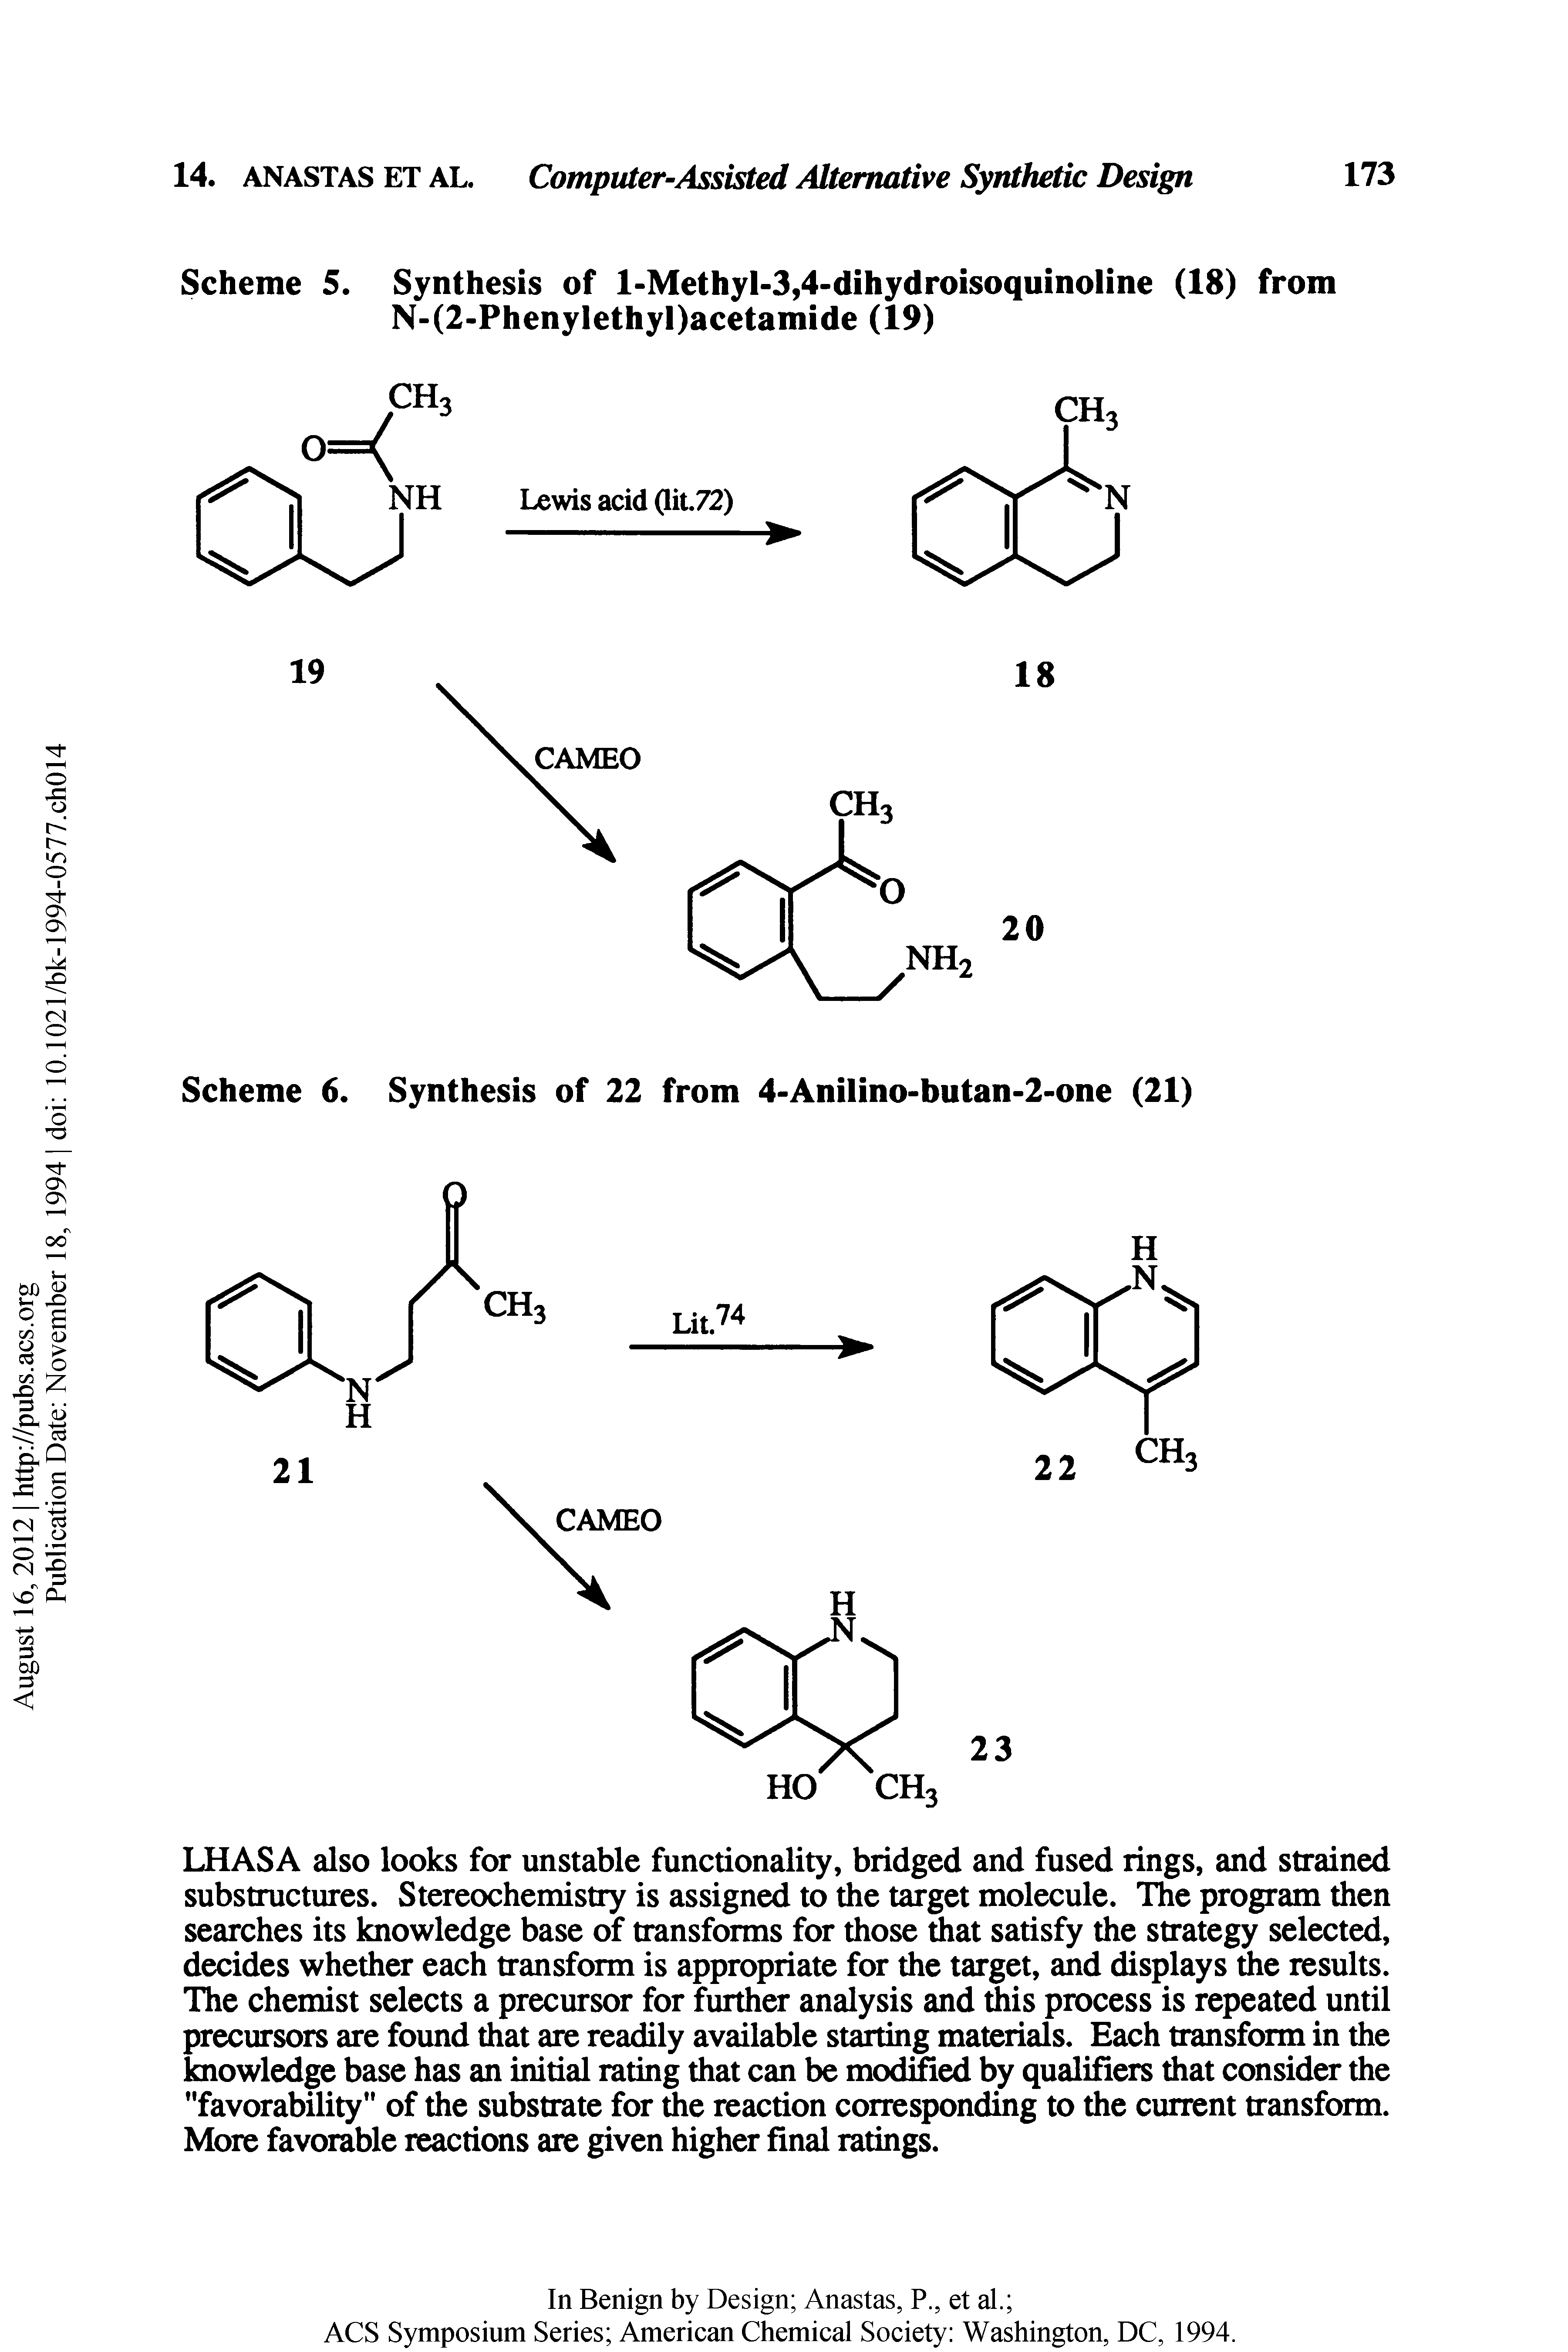 Scheme 5. Synthesis of l-Methyl-3,4-dihydroisoquinoline (18) from N-(2-Phenylethyl)acetamide (19)...